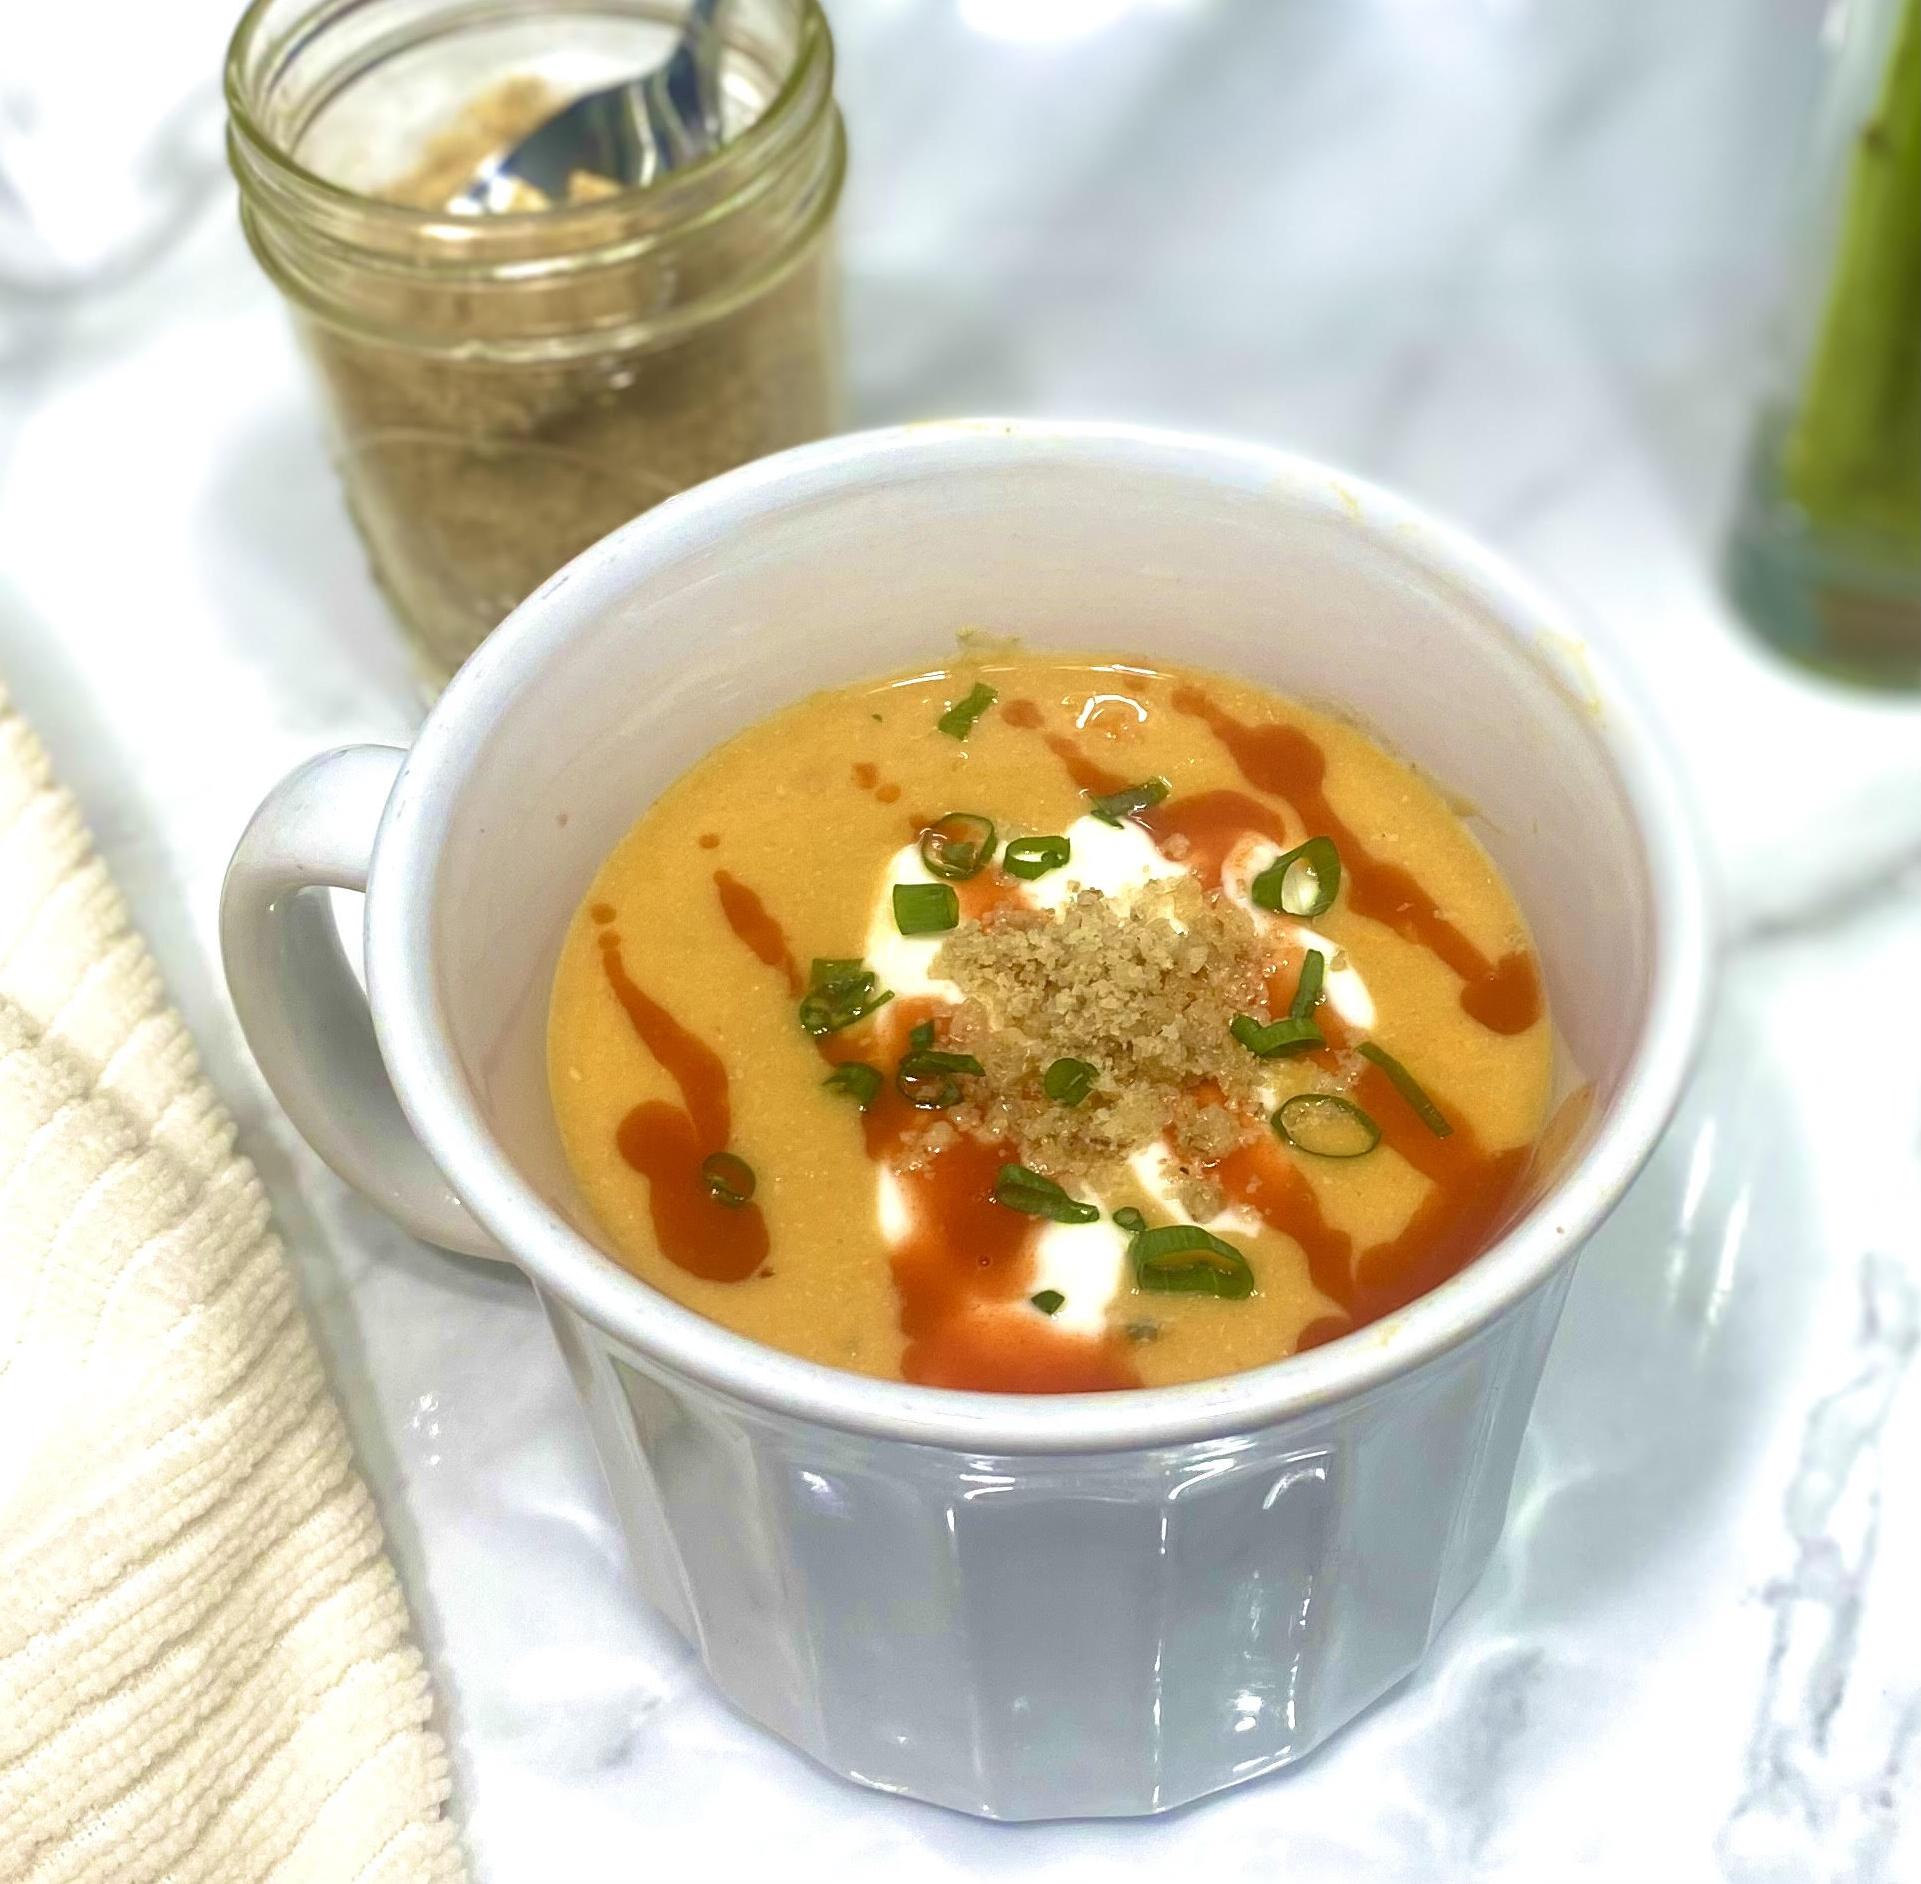  Get ready to satisfy your taste buds with this spicy vegan soup